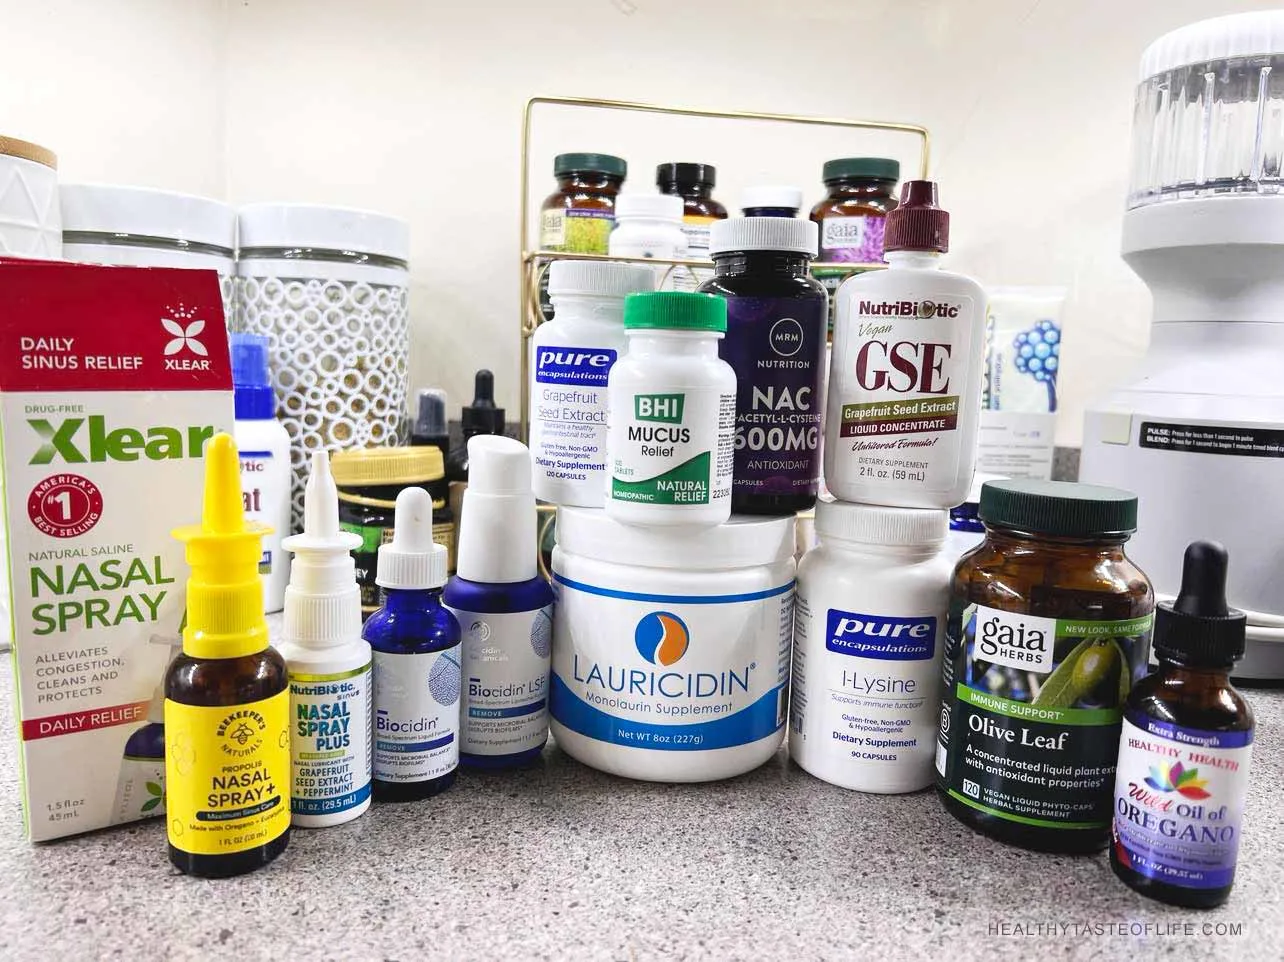 The products I personally used for sinus congestion and clearing my sinus infection.